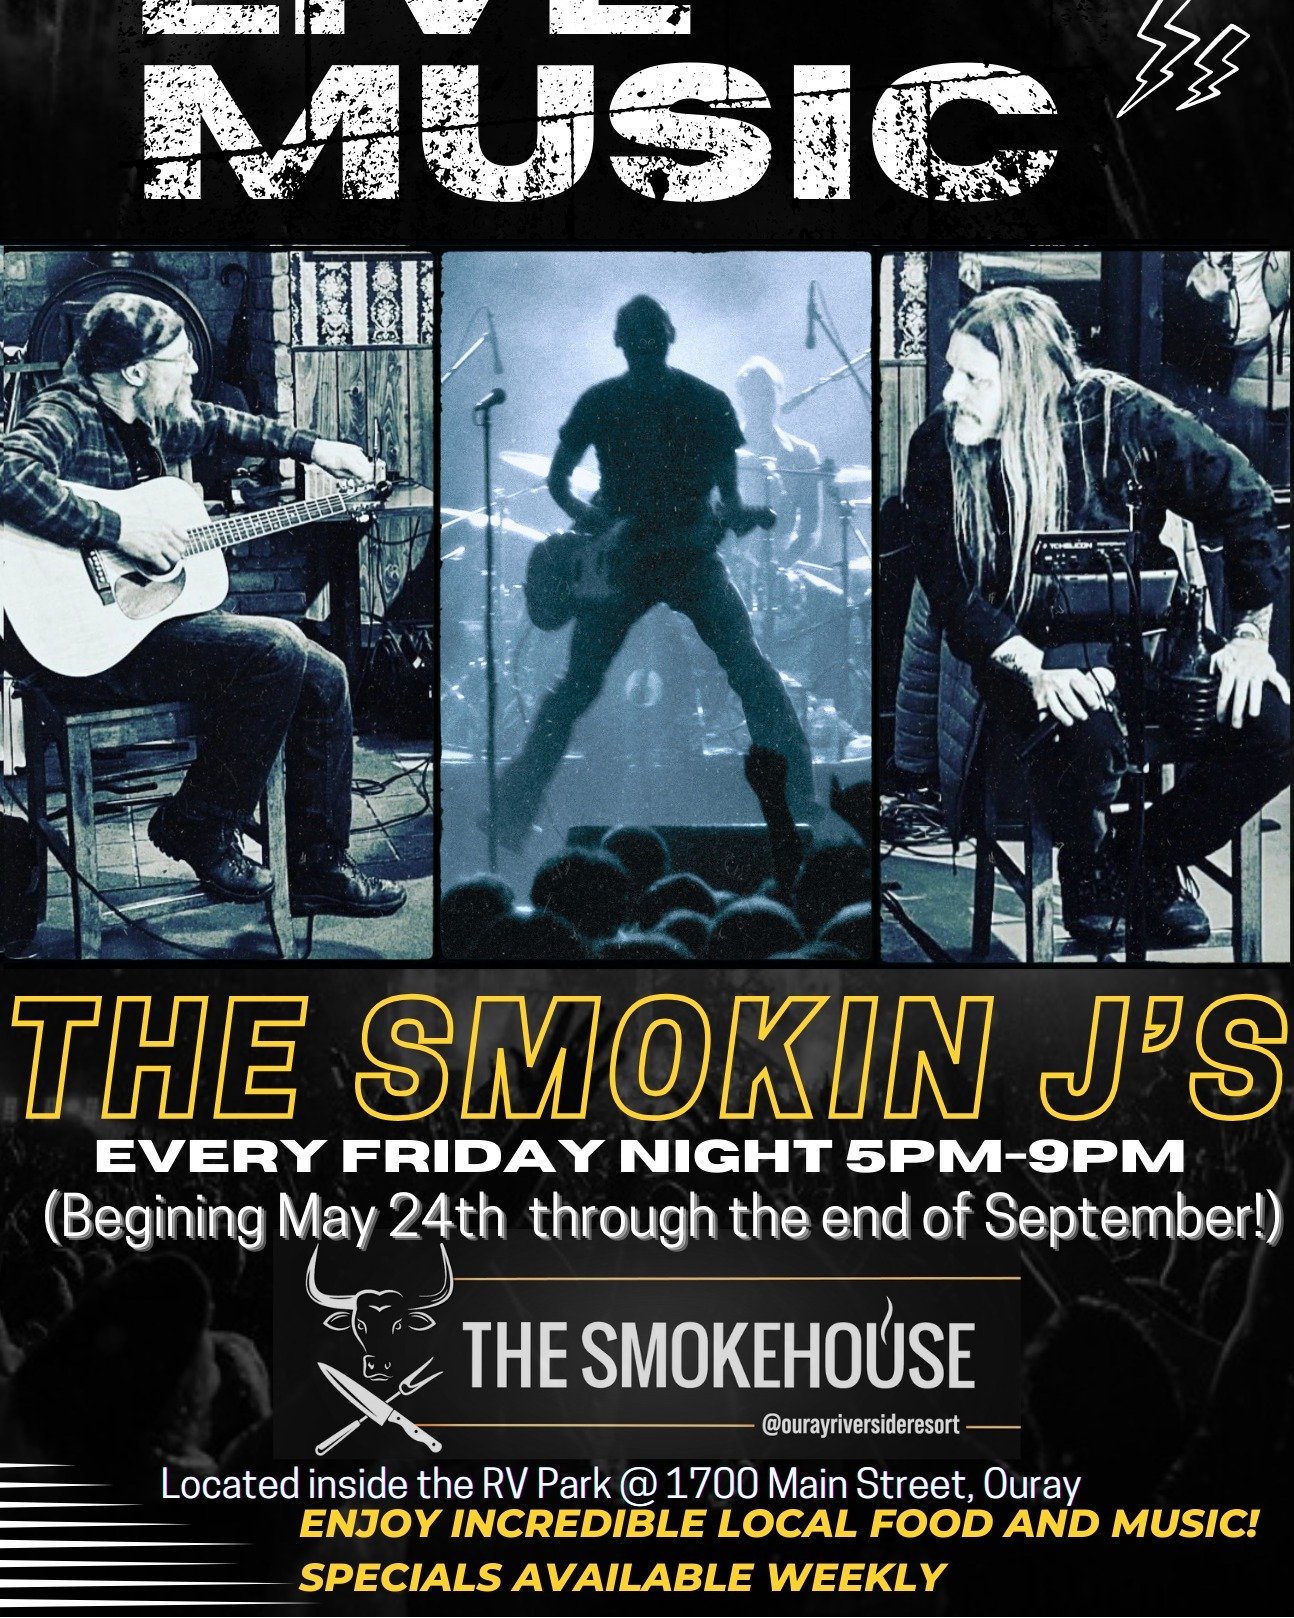 Every Friday thru the summer, enjoy live music with the Smokin' Js!  The perfect pairing with your Smokehouse favorites. 

#ouray #ouraycolorado